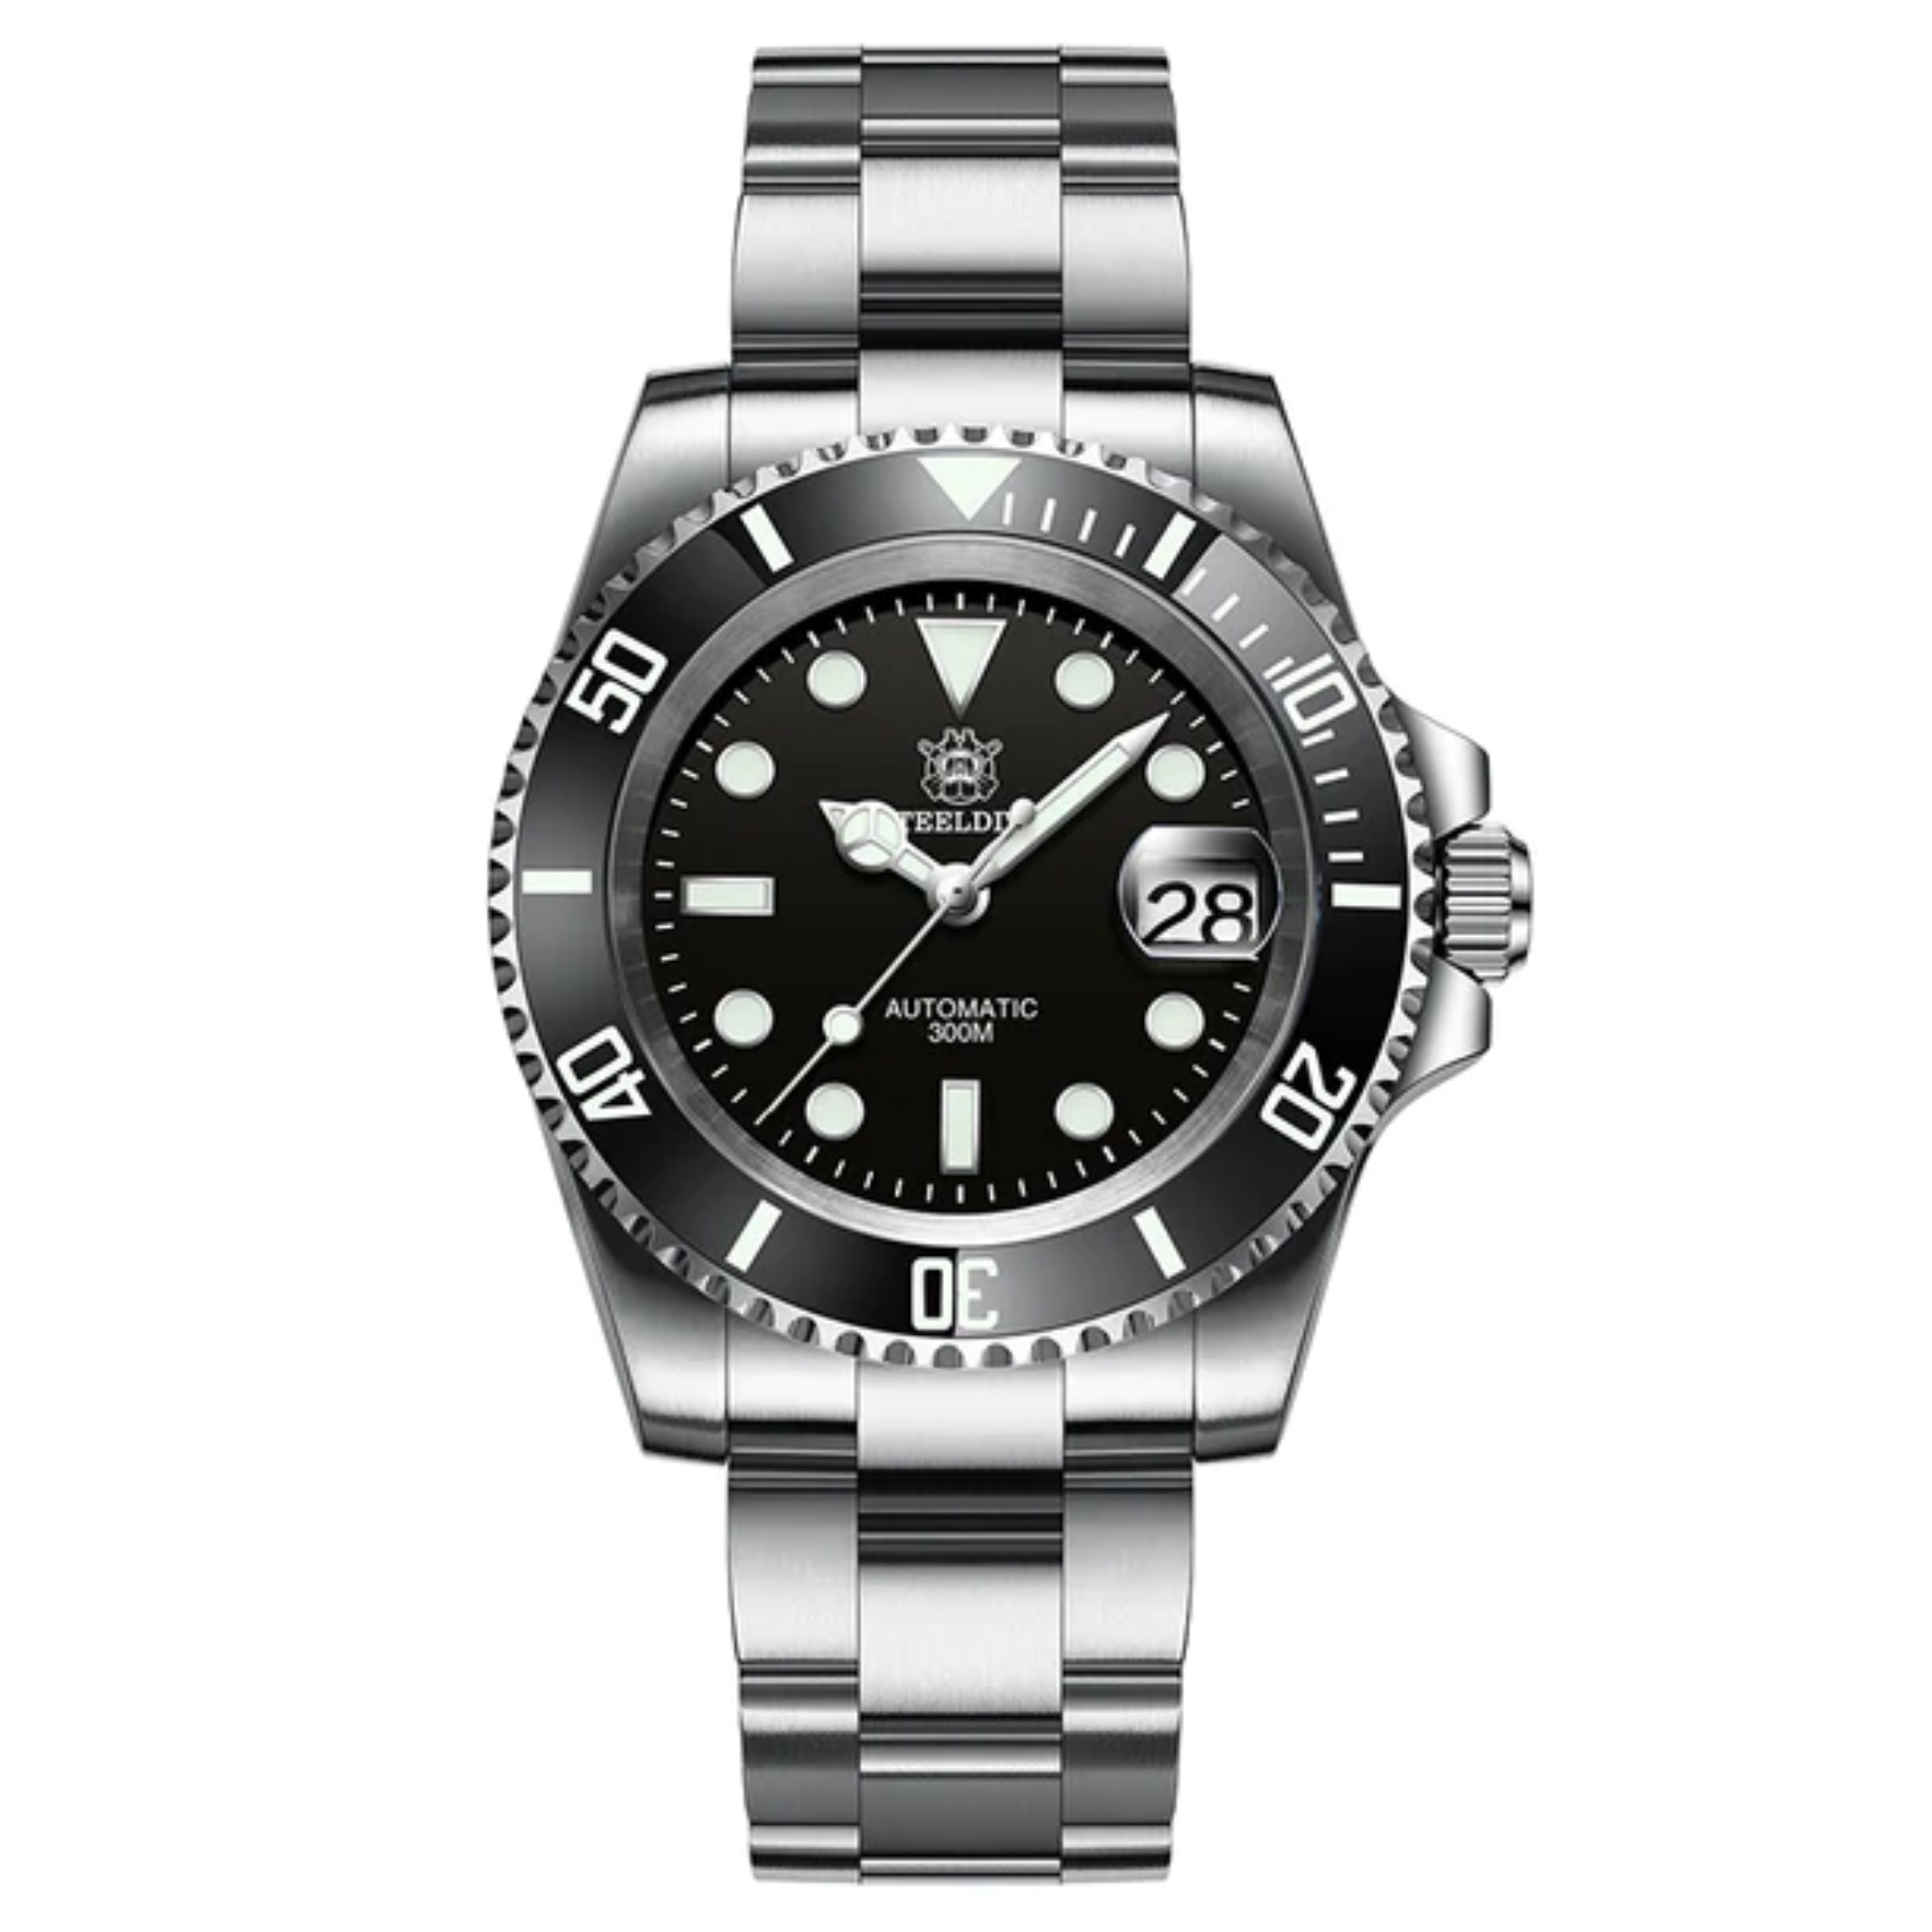 Steeldive SD1953 Sub Men Dive Watch V2 Black Dial With Oyster Bracelet